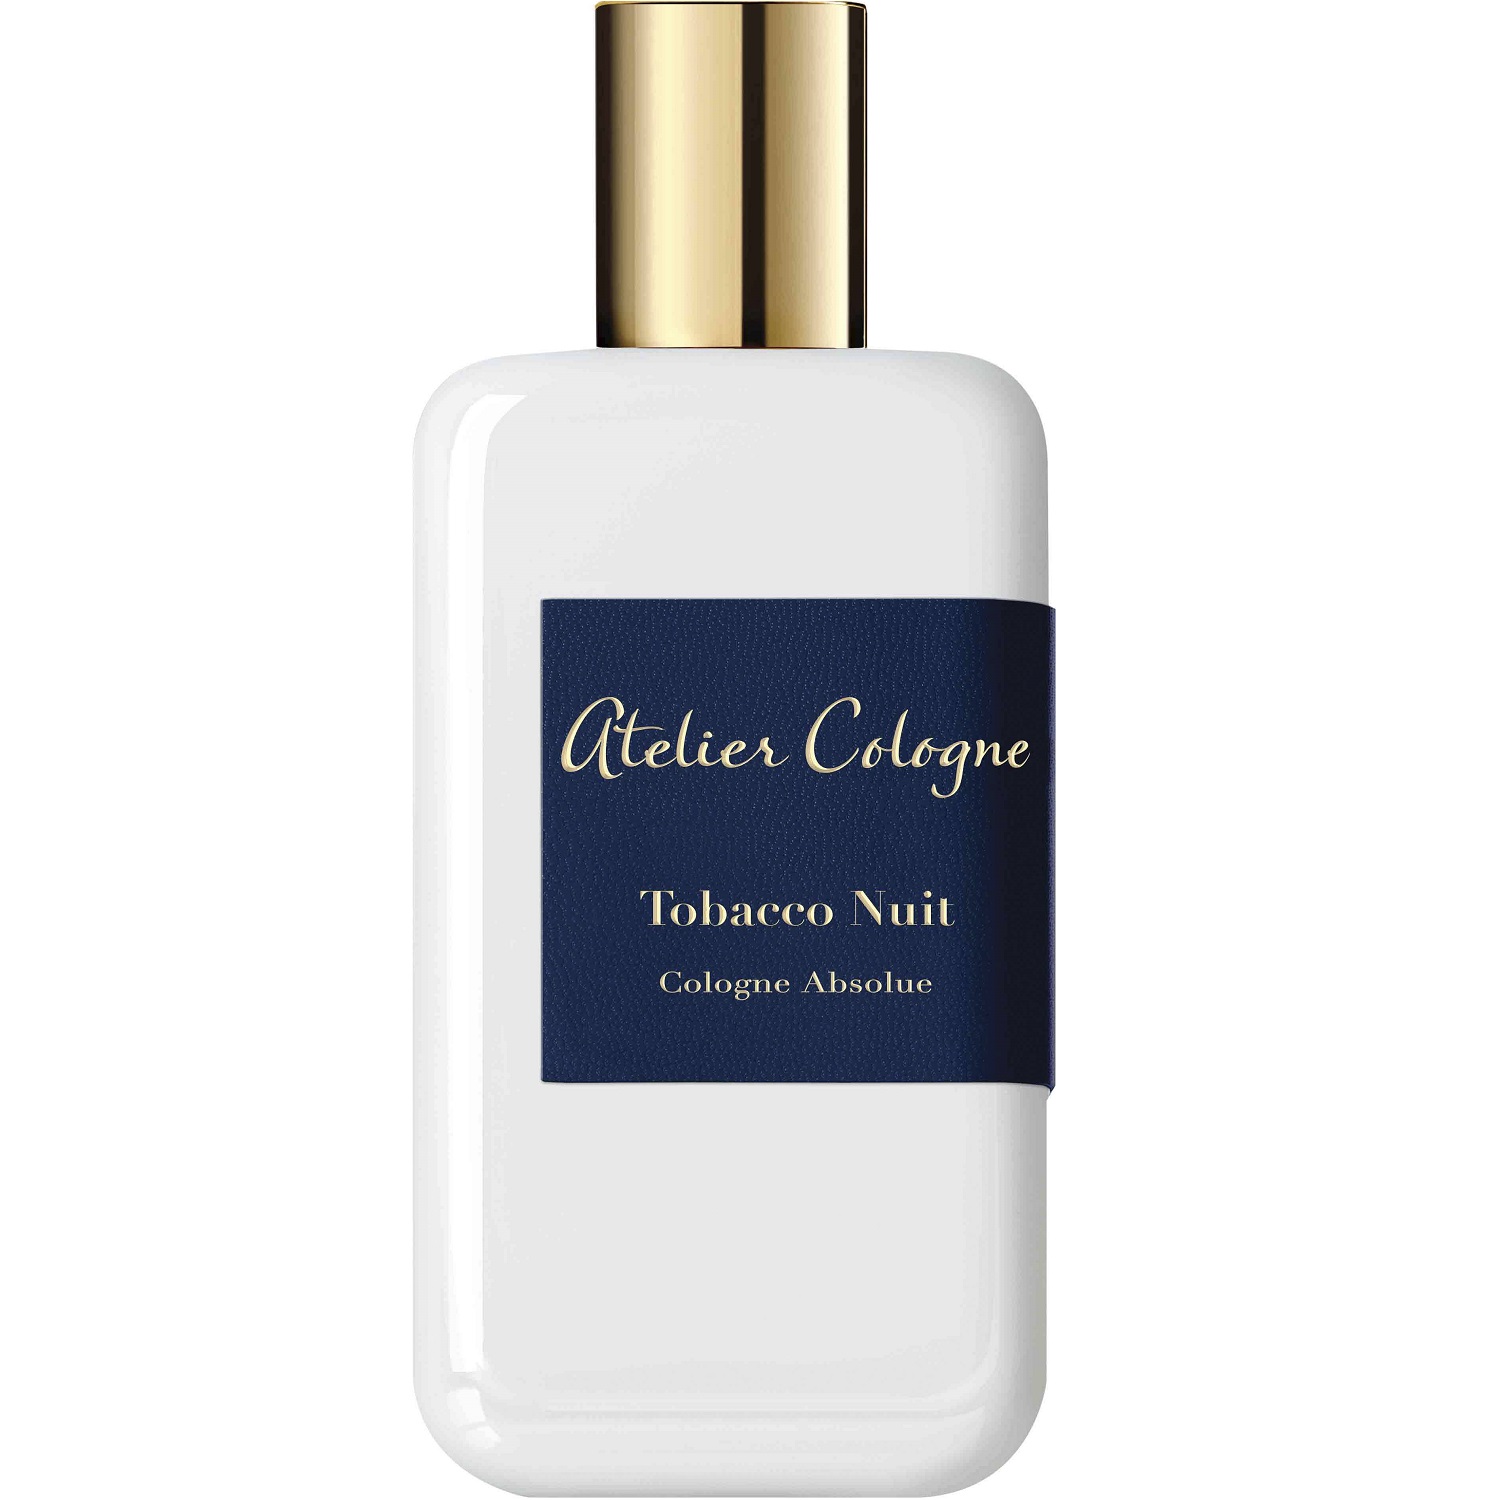 Atelier Cologne - Tobacco Nuit (2мл)